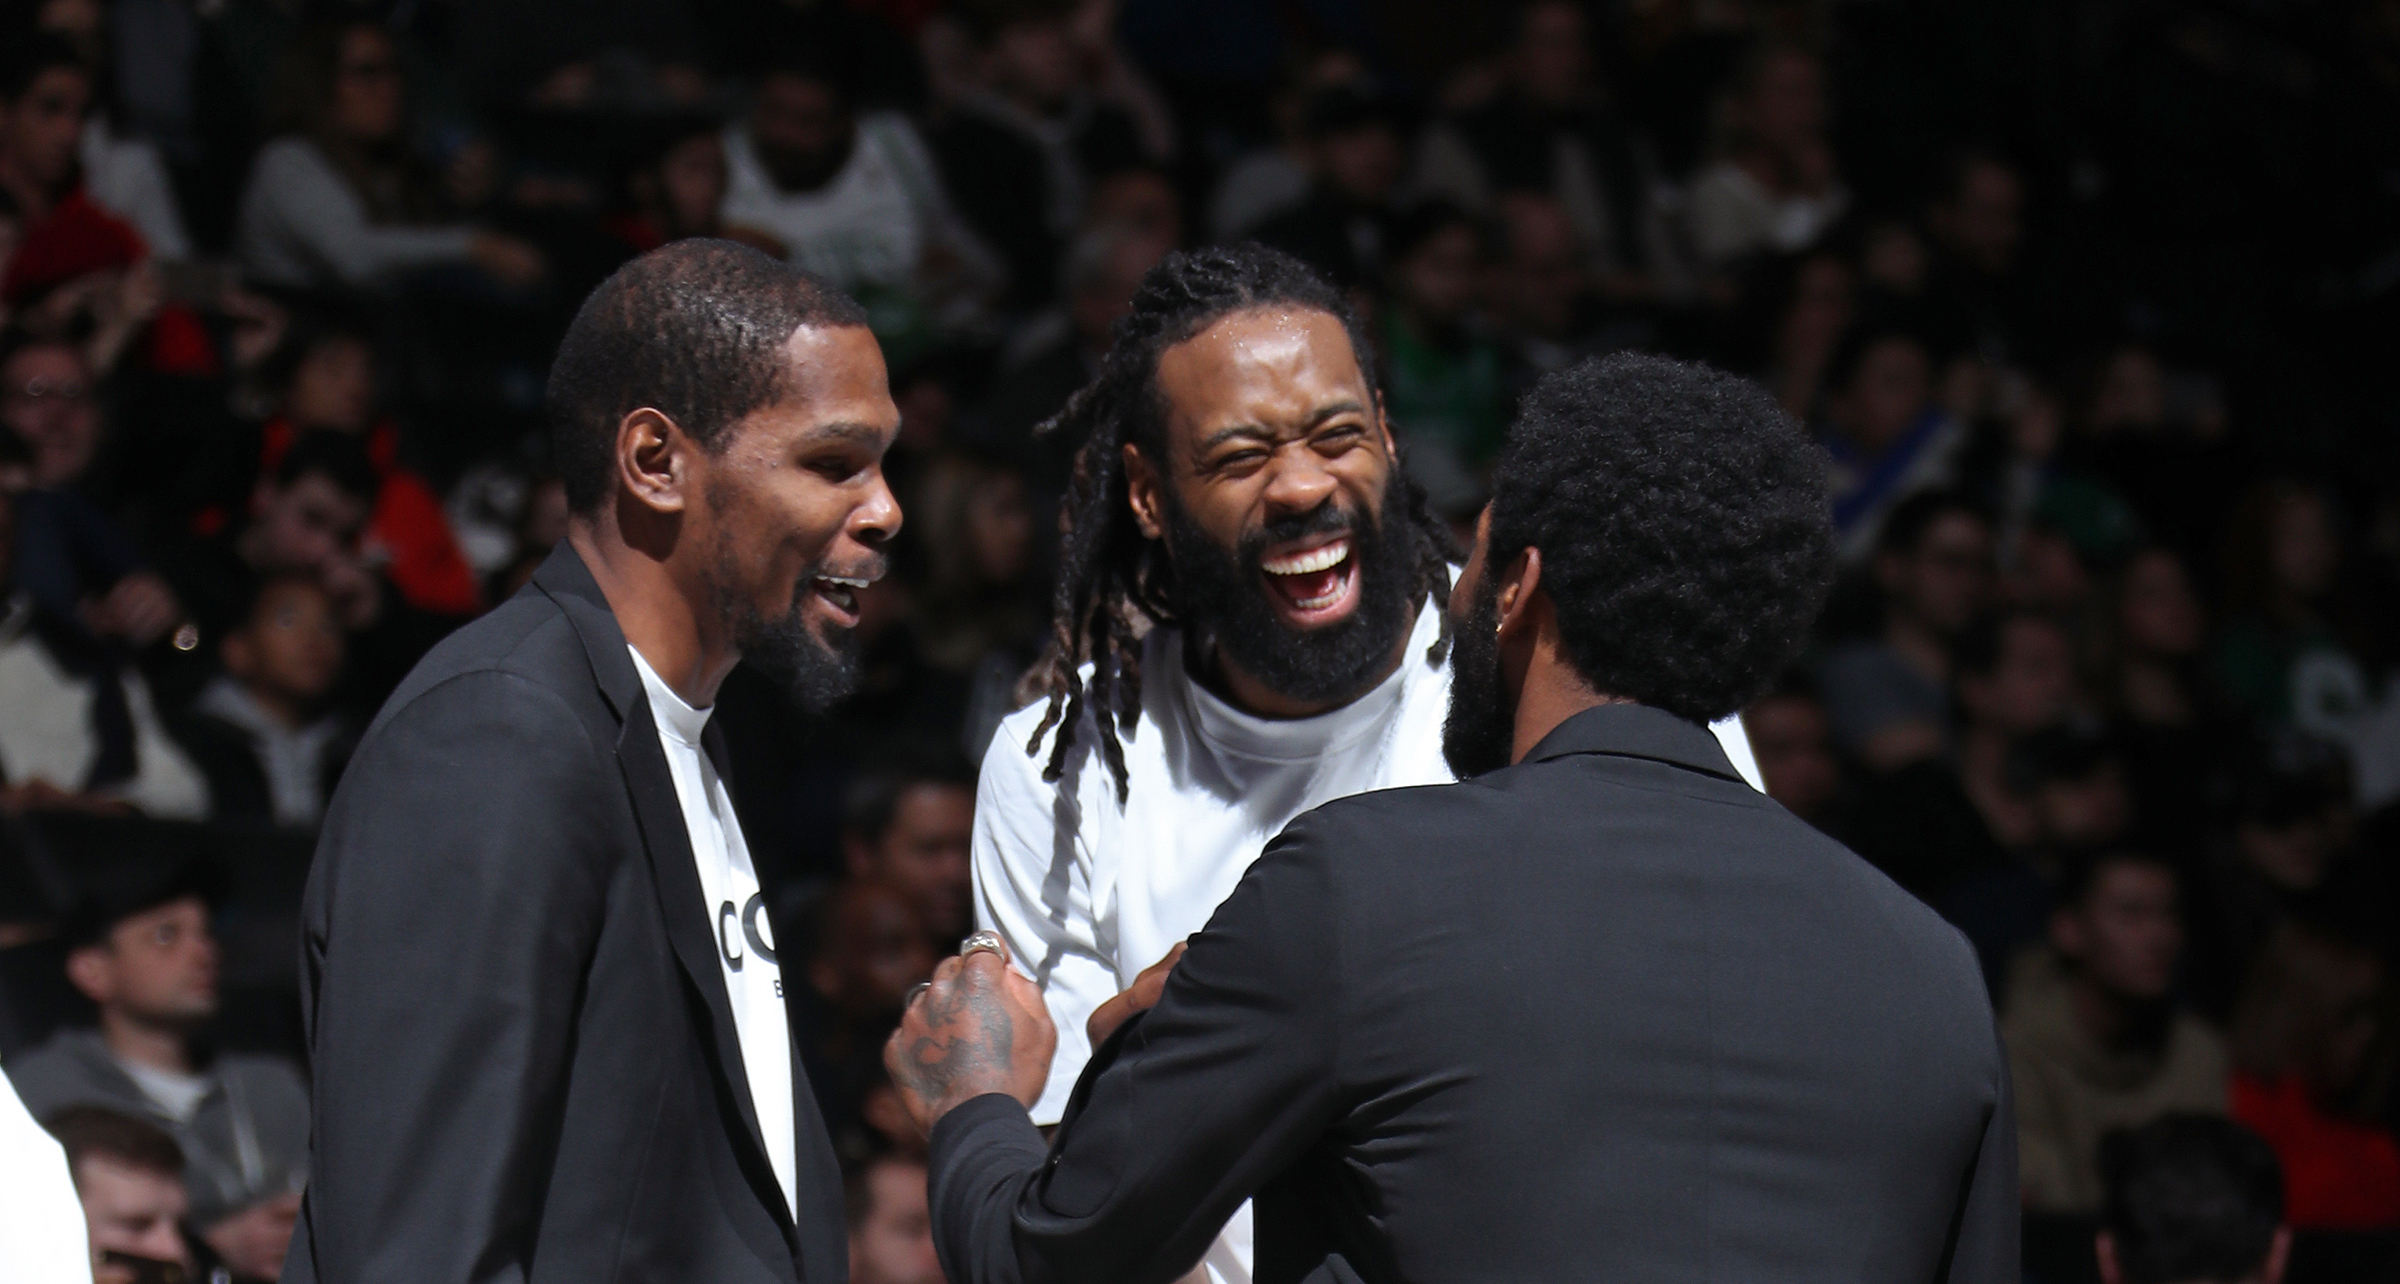 BROOKLYN, NY - NOVEMBER 29: Kevin Durant #7, DeAndre Jordan #6 and Kyrie Irving #11 of the Brooklyn Nets smile and laugh during the game against the Boston Celtics on November 29, 2019 at Barclays Center in Brooklyn, New York. NOTE TO USER: User expressly acknowledges and agrees that, by downloading and or using this photograph, User is consenting to the terms and conditions of the Getty Images License Agreement. Mandatory Copyright Notice: Copyright 2019 NBAE (Photo by Nathaniel S. Butler/NBAE via Getty Images)